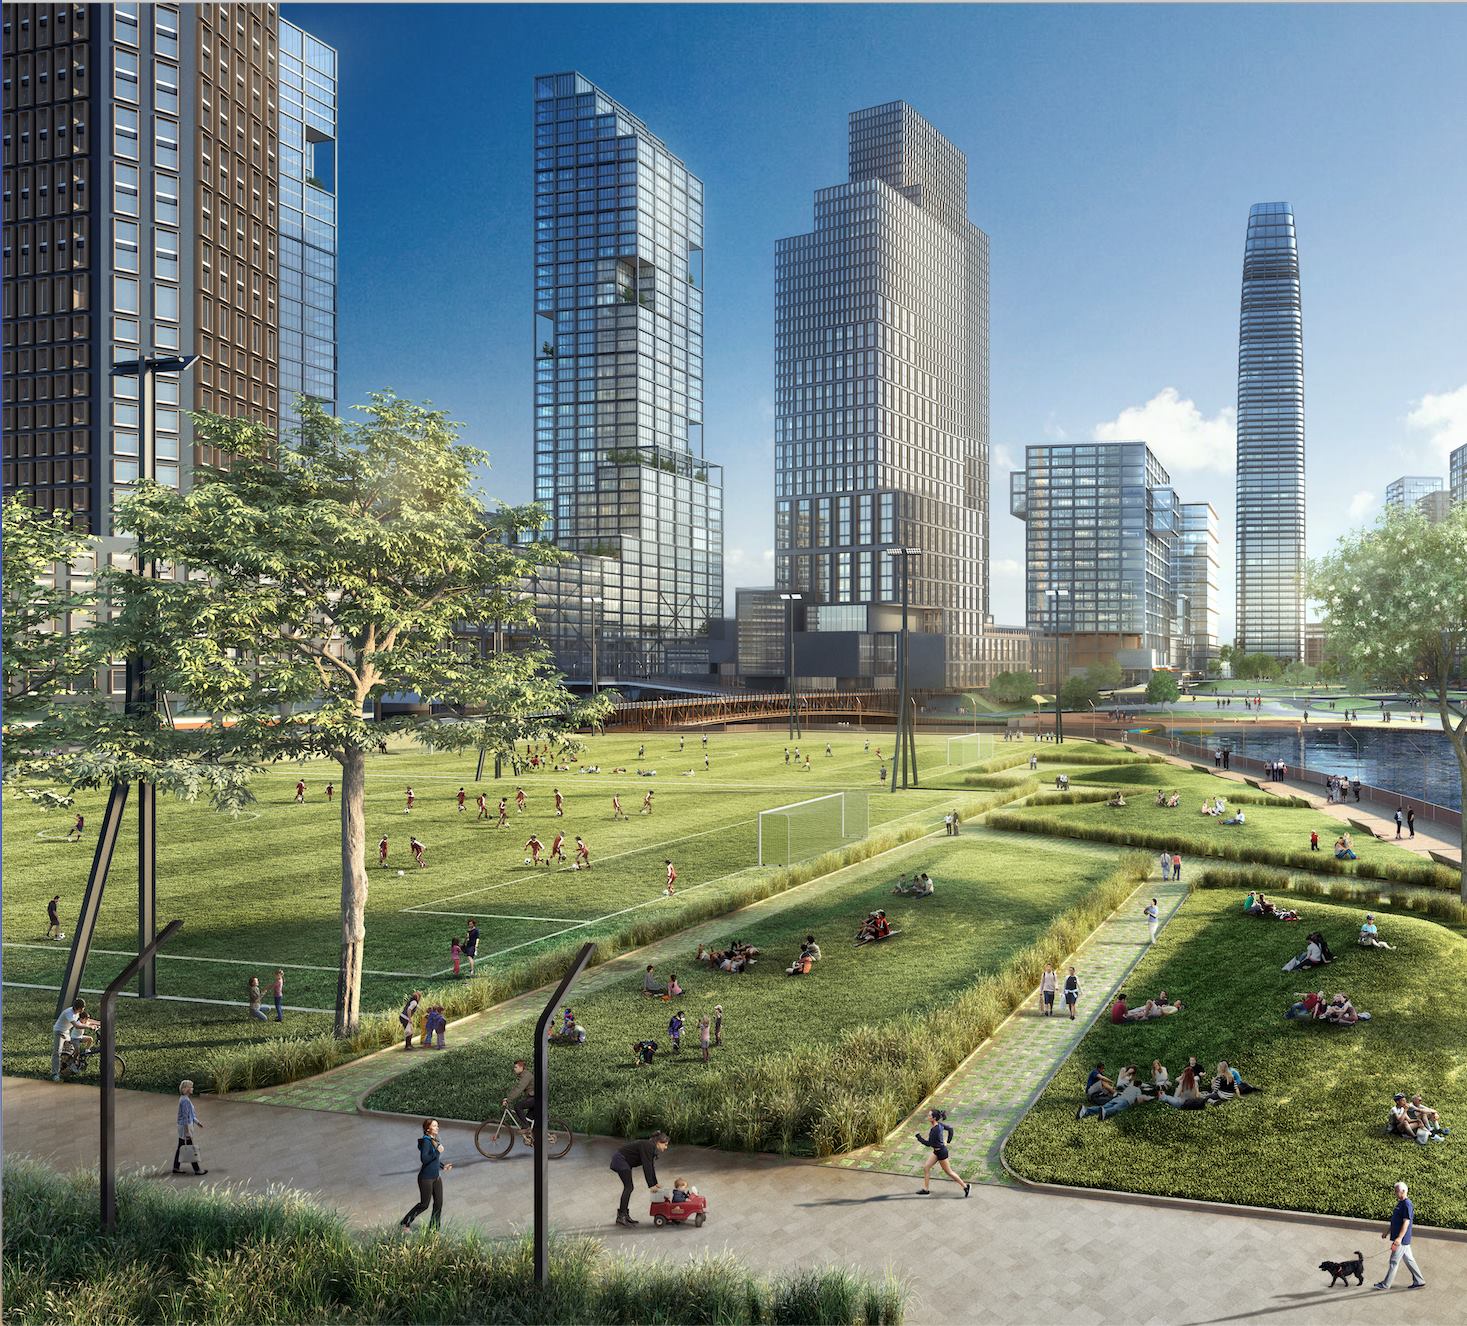 Rendering of Lincoln Yards